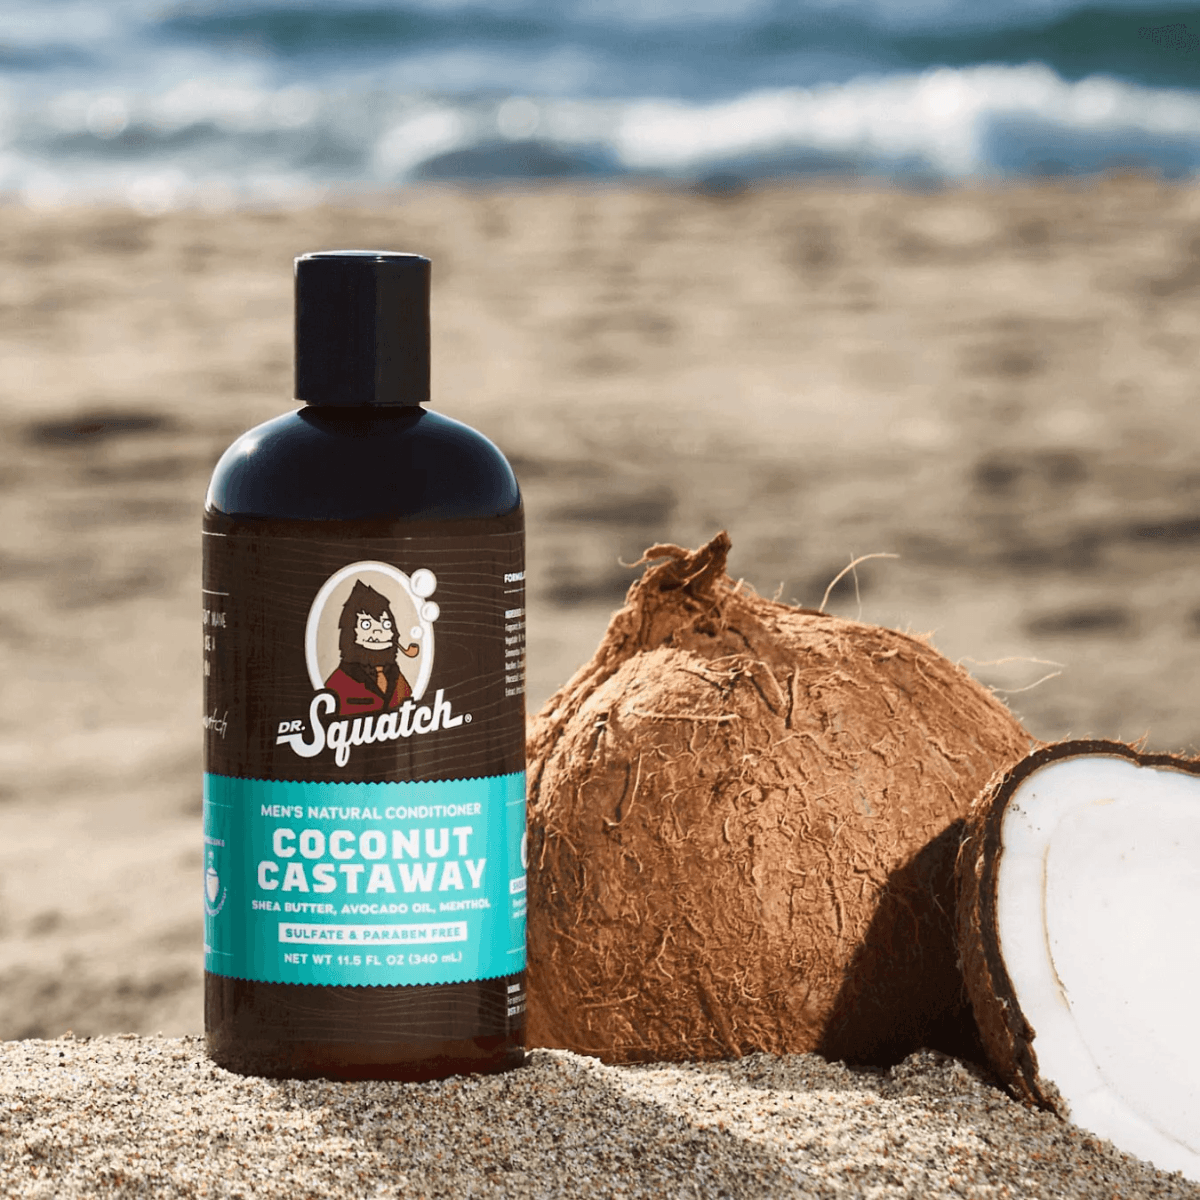 Dr. Squatch 3-Pack Coconut Castaway FREE SHIPPING 863765000049